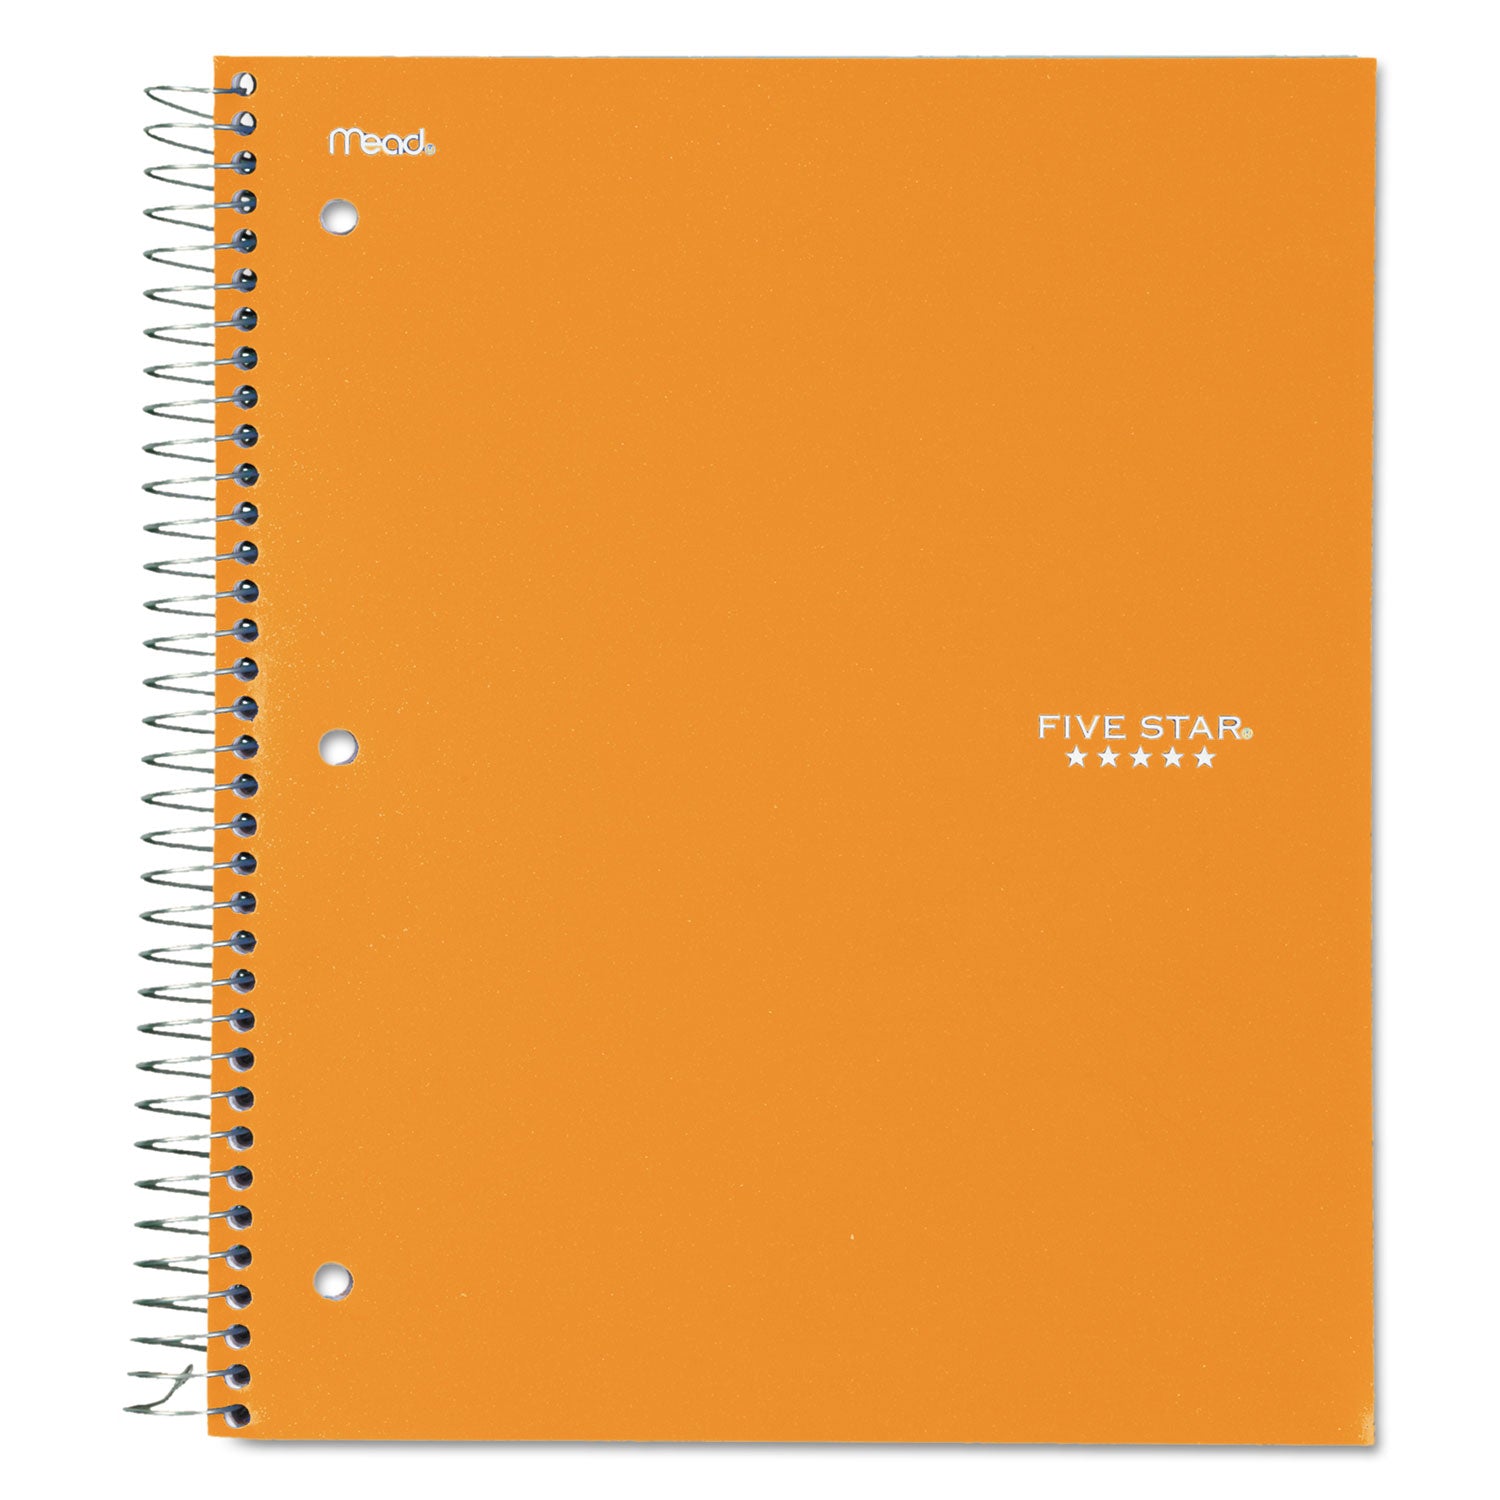 Trend Wirebound Notebook, Two Pockets, 3-Subject, Medium/College Rule, Randomly Assorted Cover Color, (150) 11 x 8.5 Sheets - 